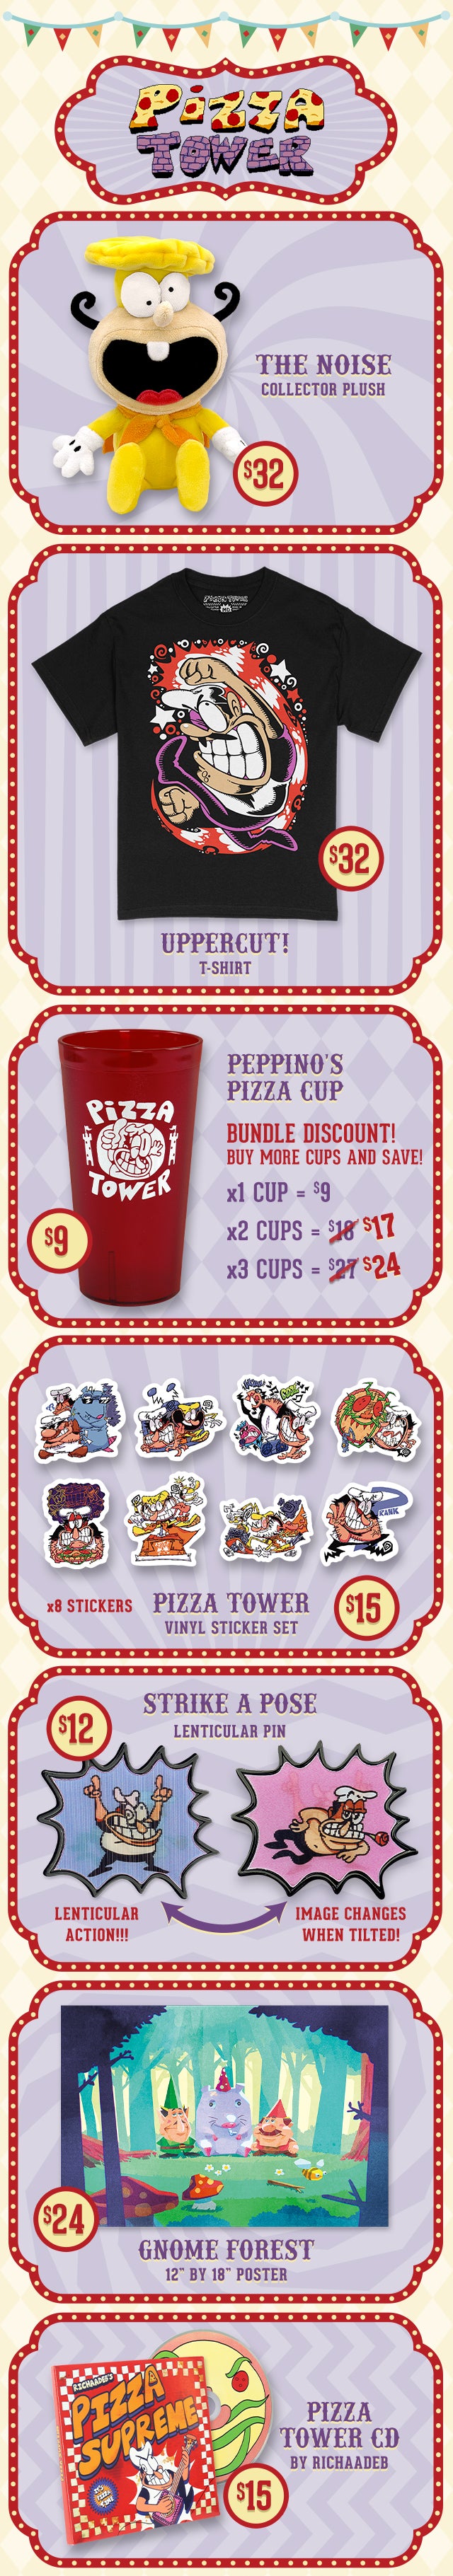 Pizza Tower - The Noise Plush - Fangamer